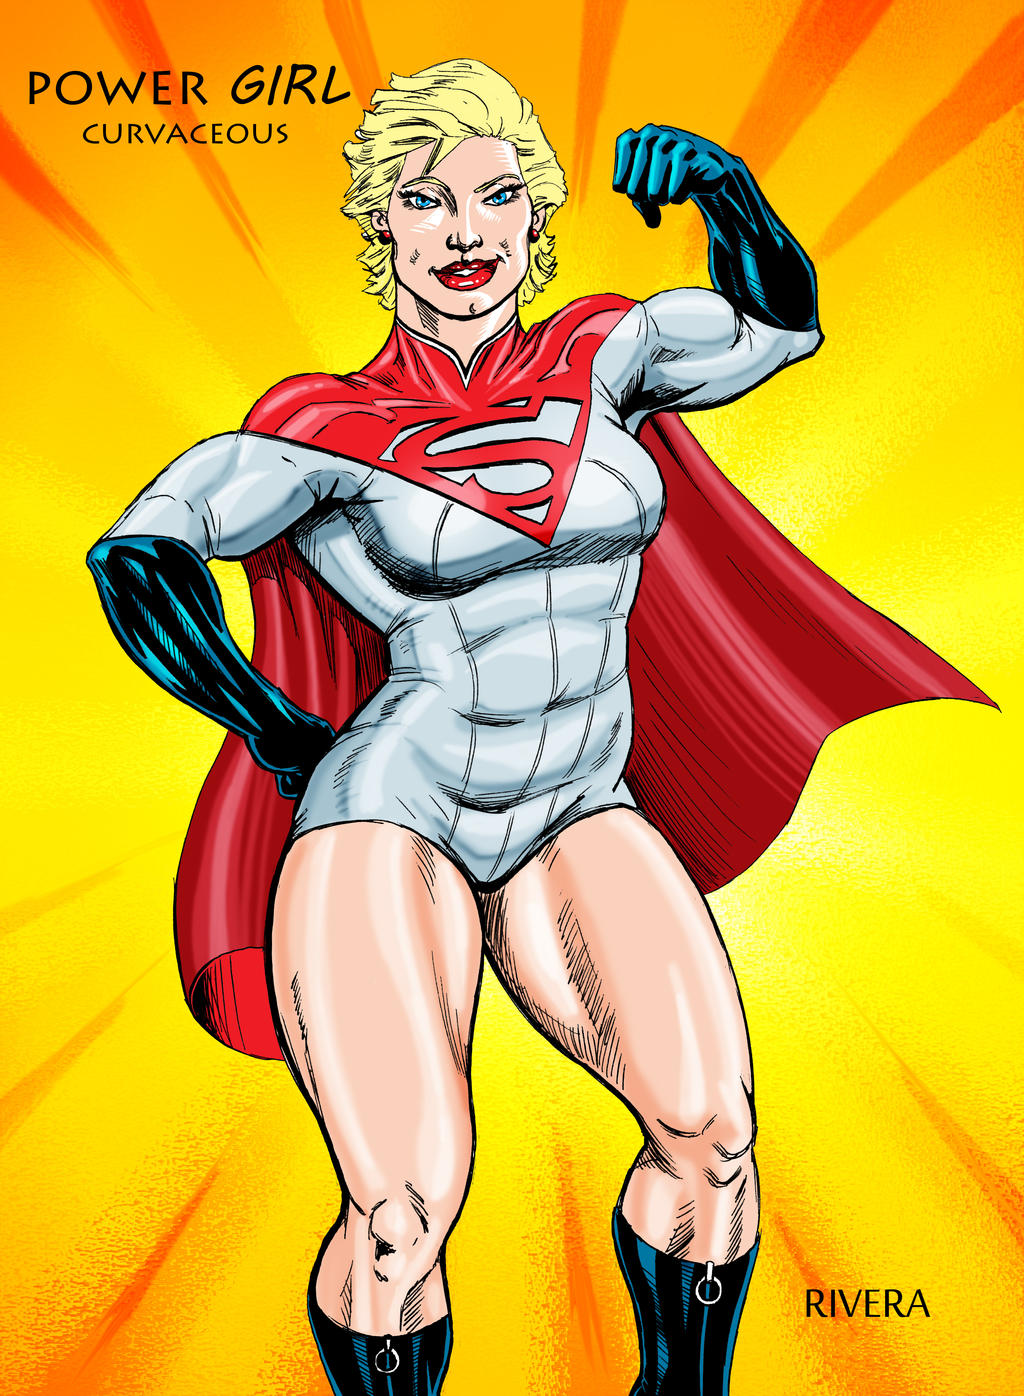 Curvaceous Power Girl